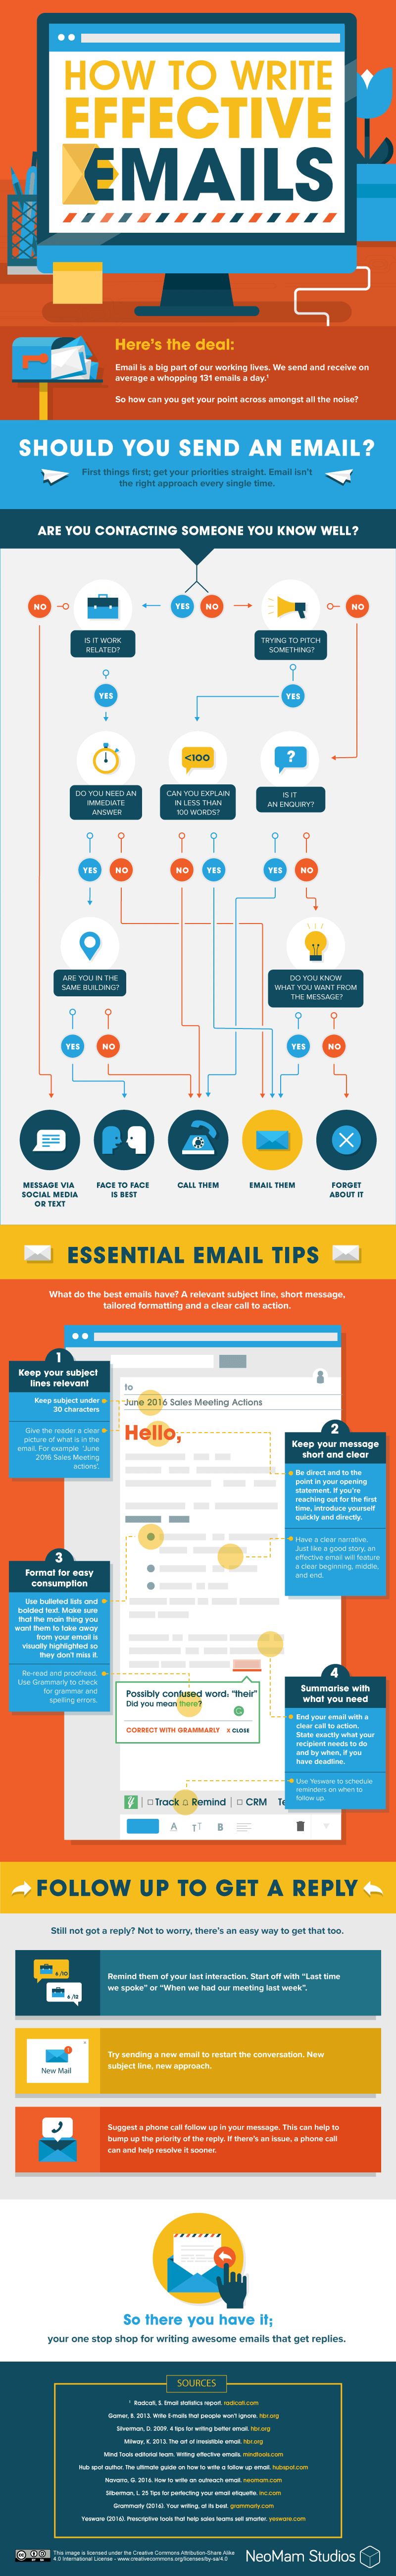 How-to-Write-Effective-Emails-DV3